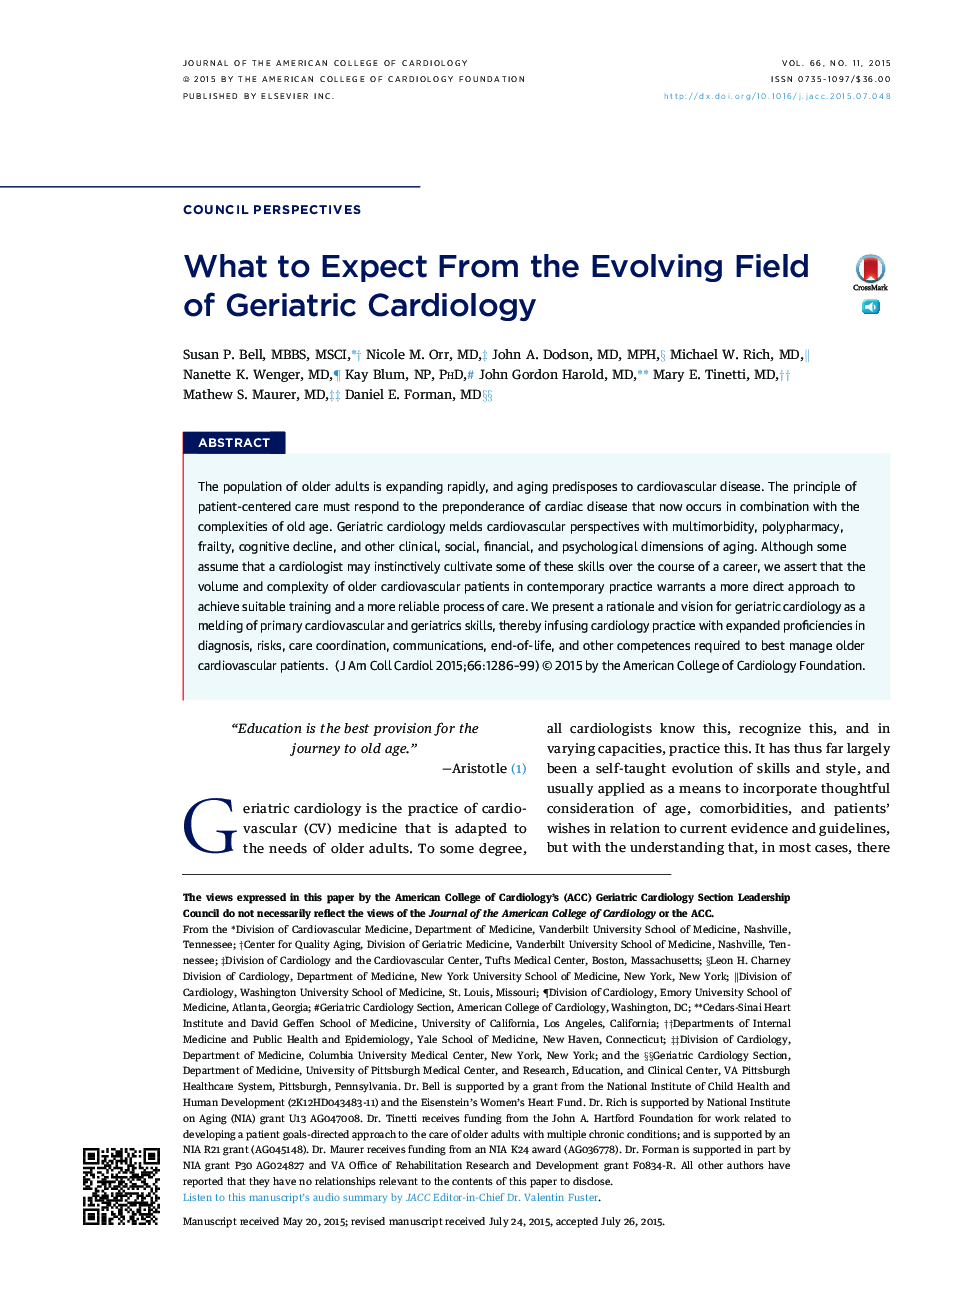 What to Expect From the Evolving Field ofÂ Geriatric Cardiology